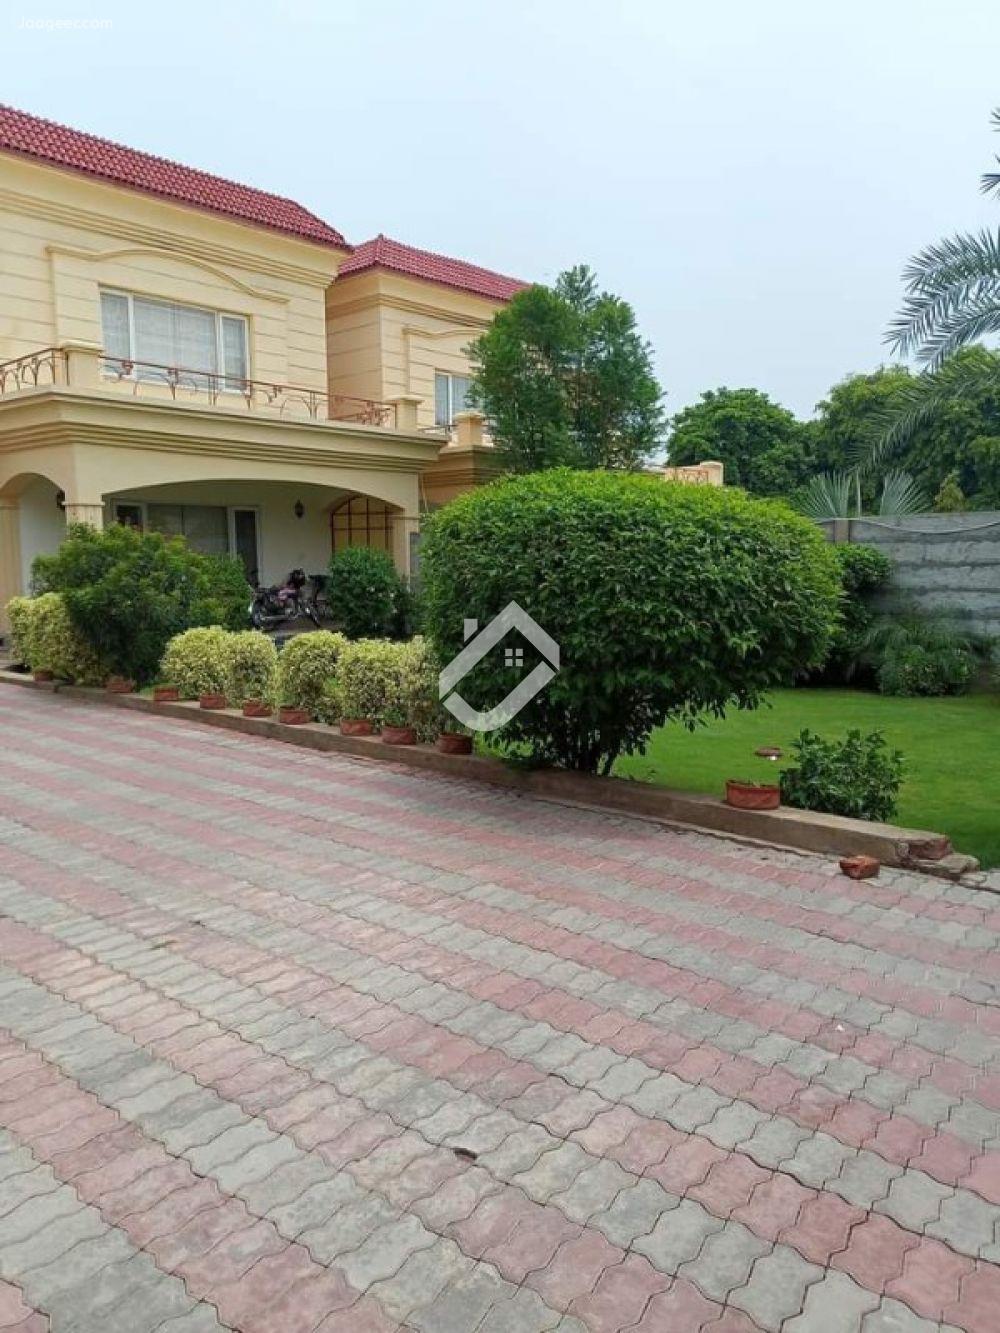 View  2 Kanal Double Storey Commercial House For Sale In Multan Cantonment in Multan Cantonment, Multan